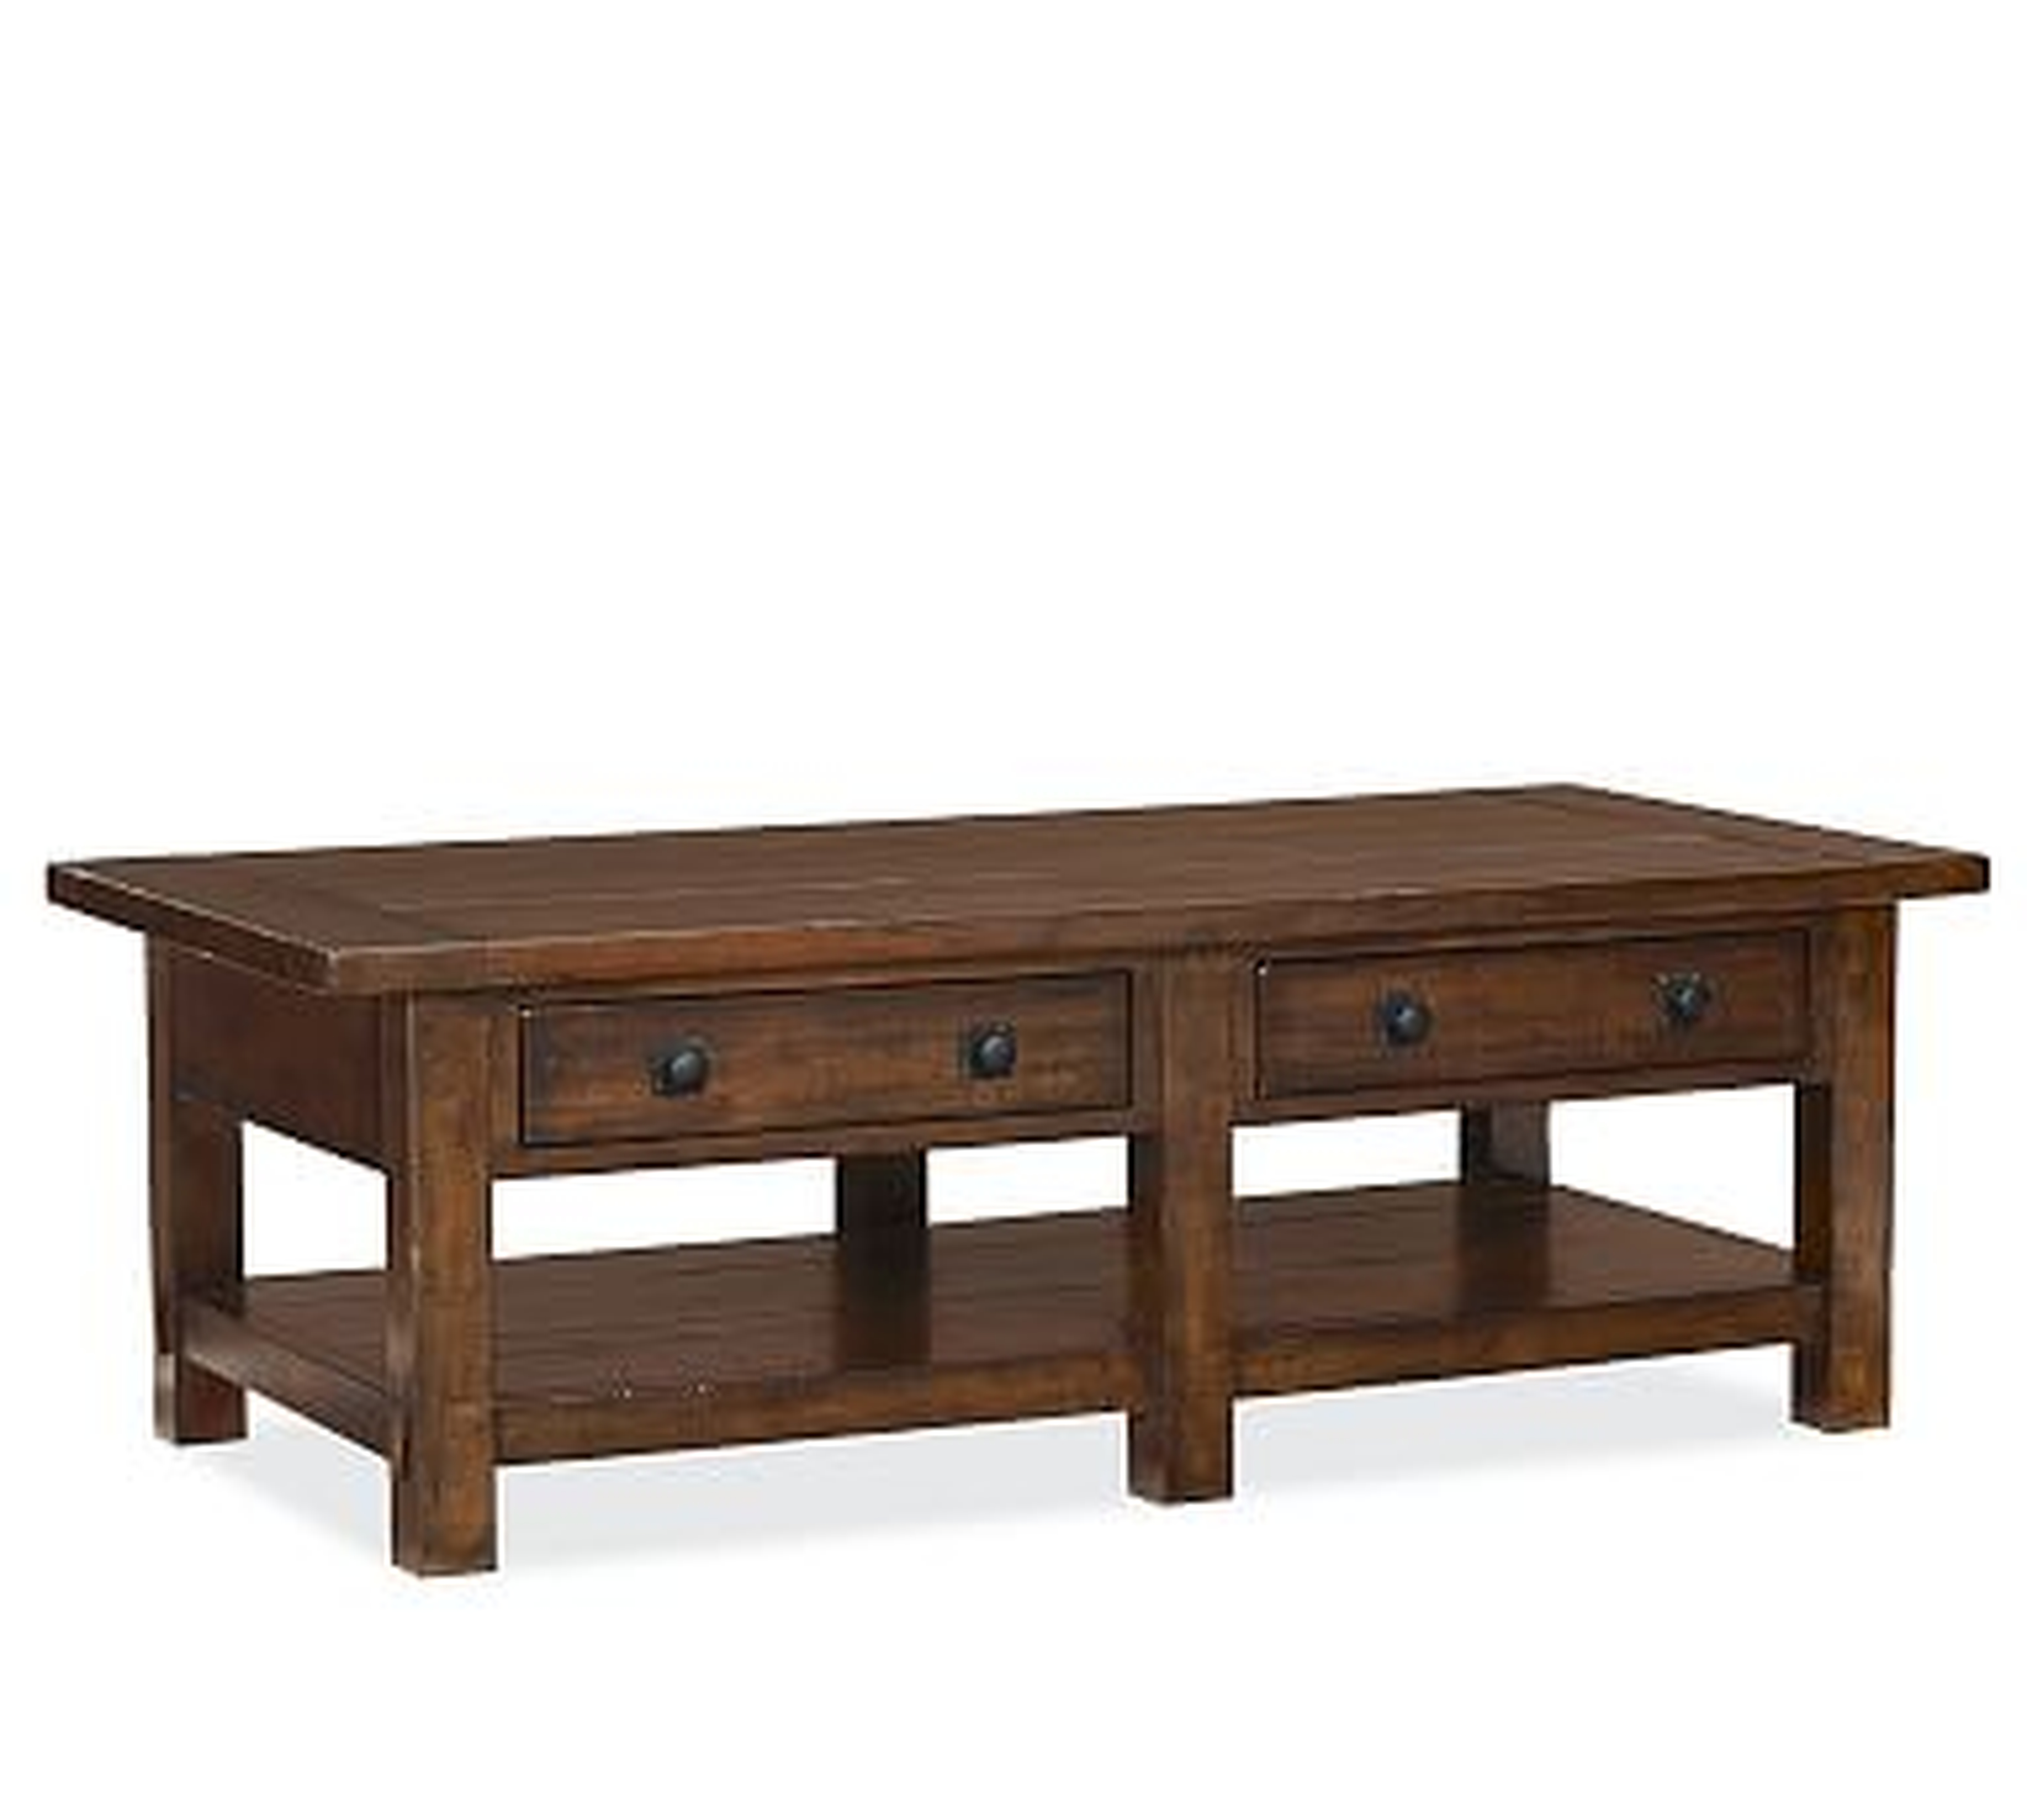 Benchwright Rectangular Wood Coffee Table with Drawers, Rustic Mahogany, 54"L - Pottery Barn